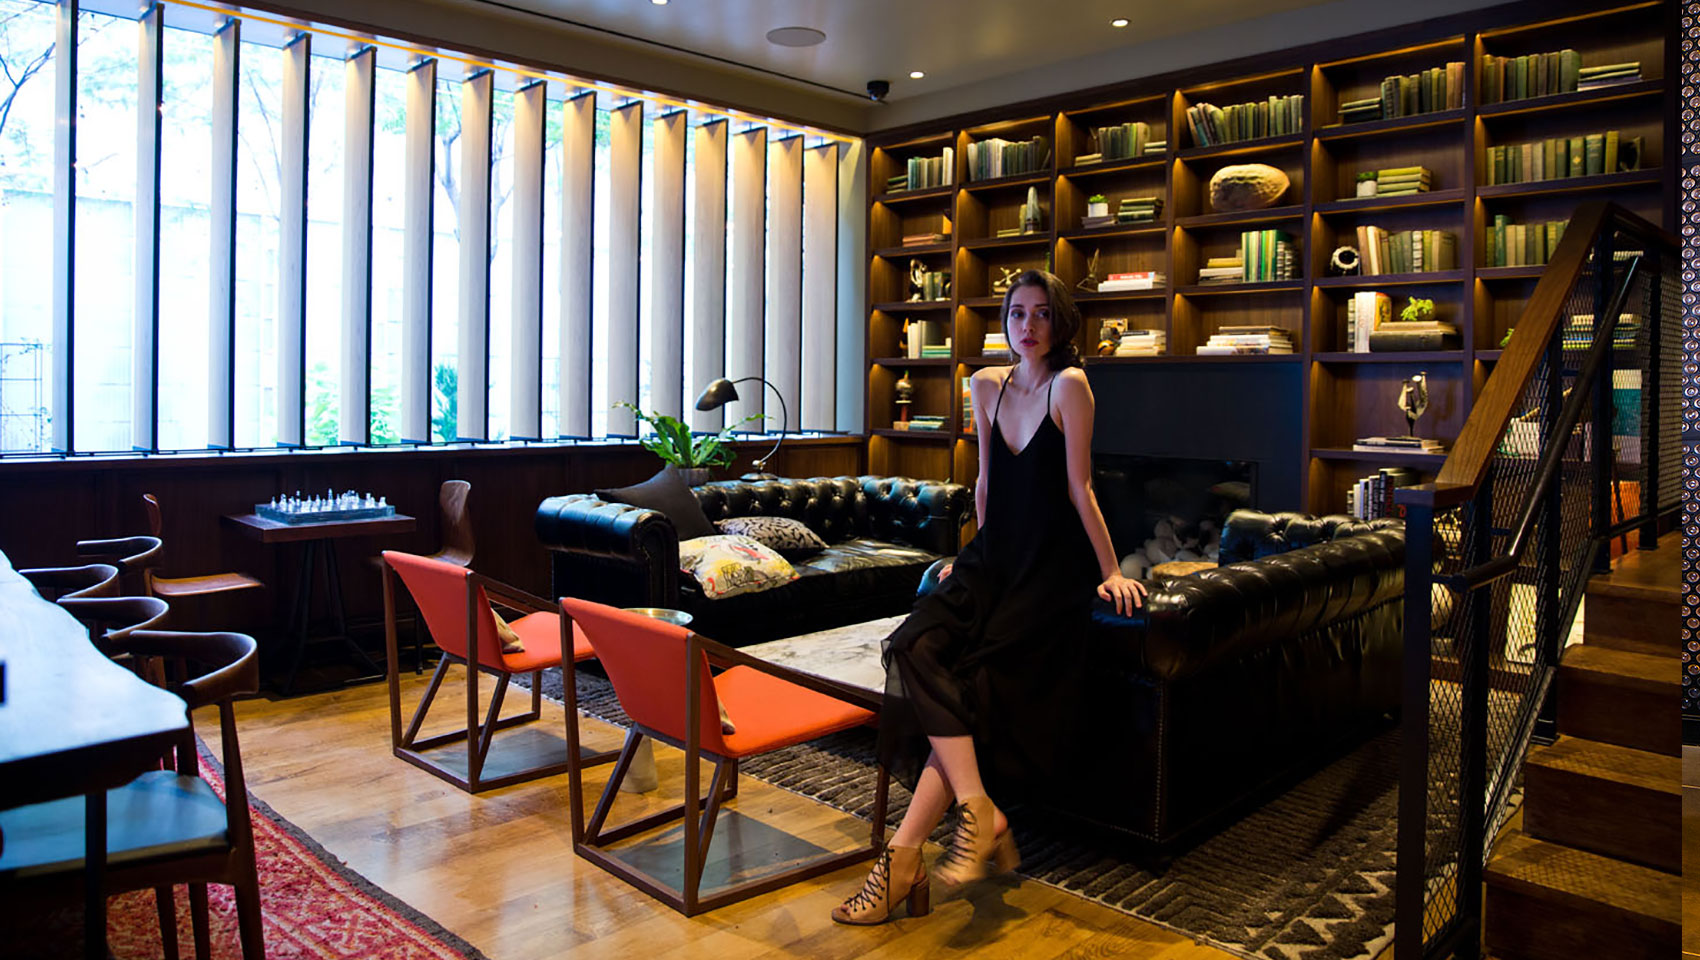 Woman leaning against leather seating in private dining area next to area with large bookshelves